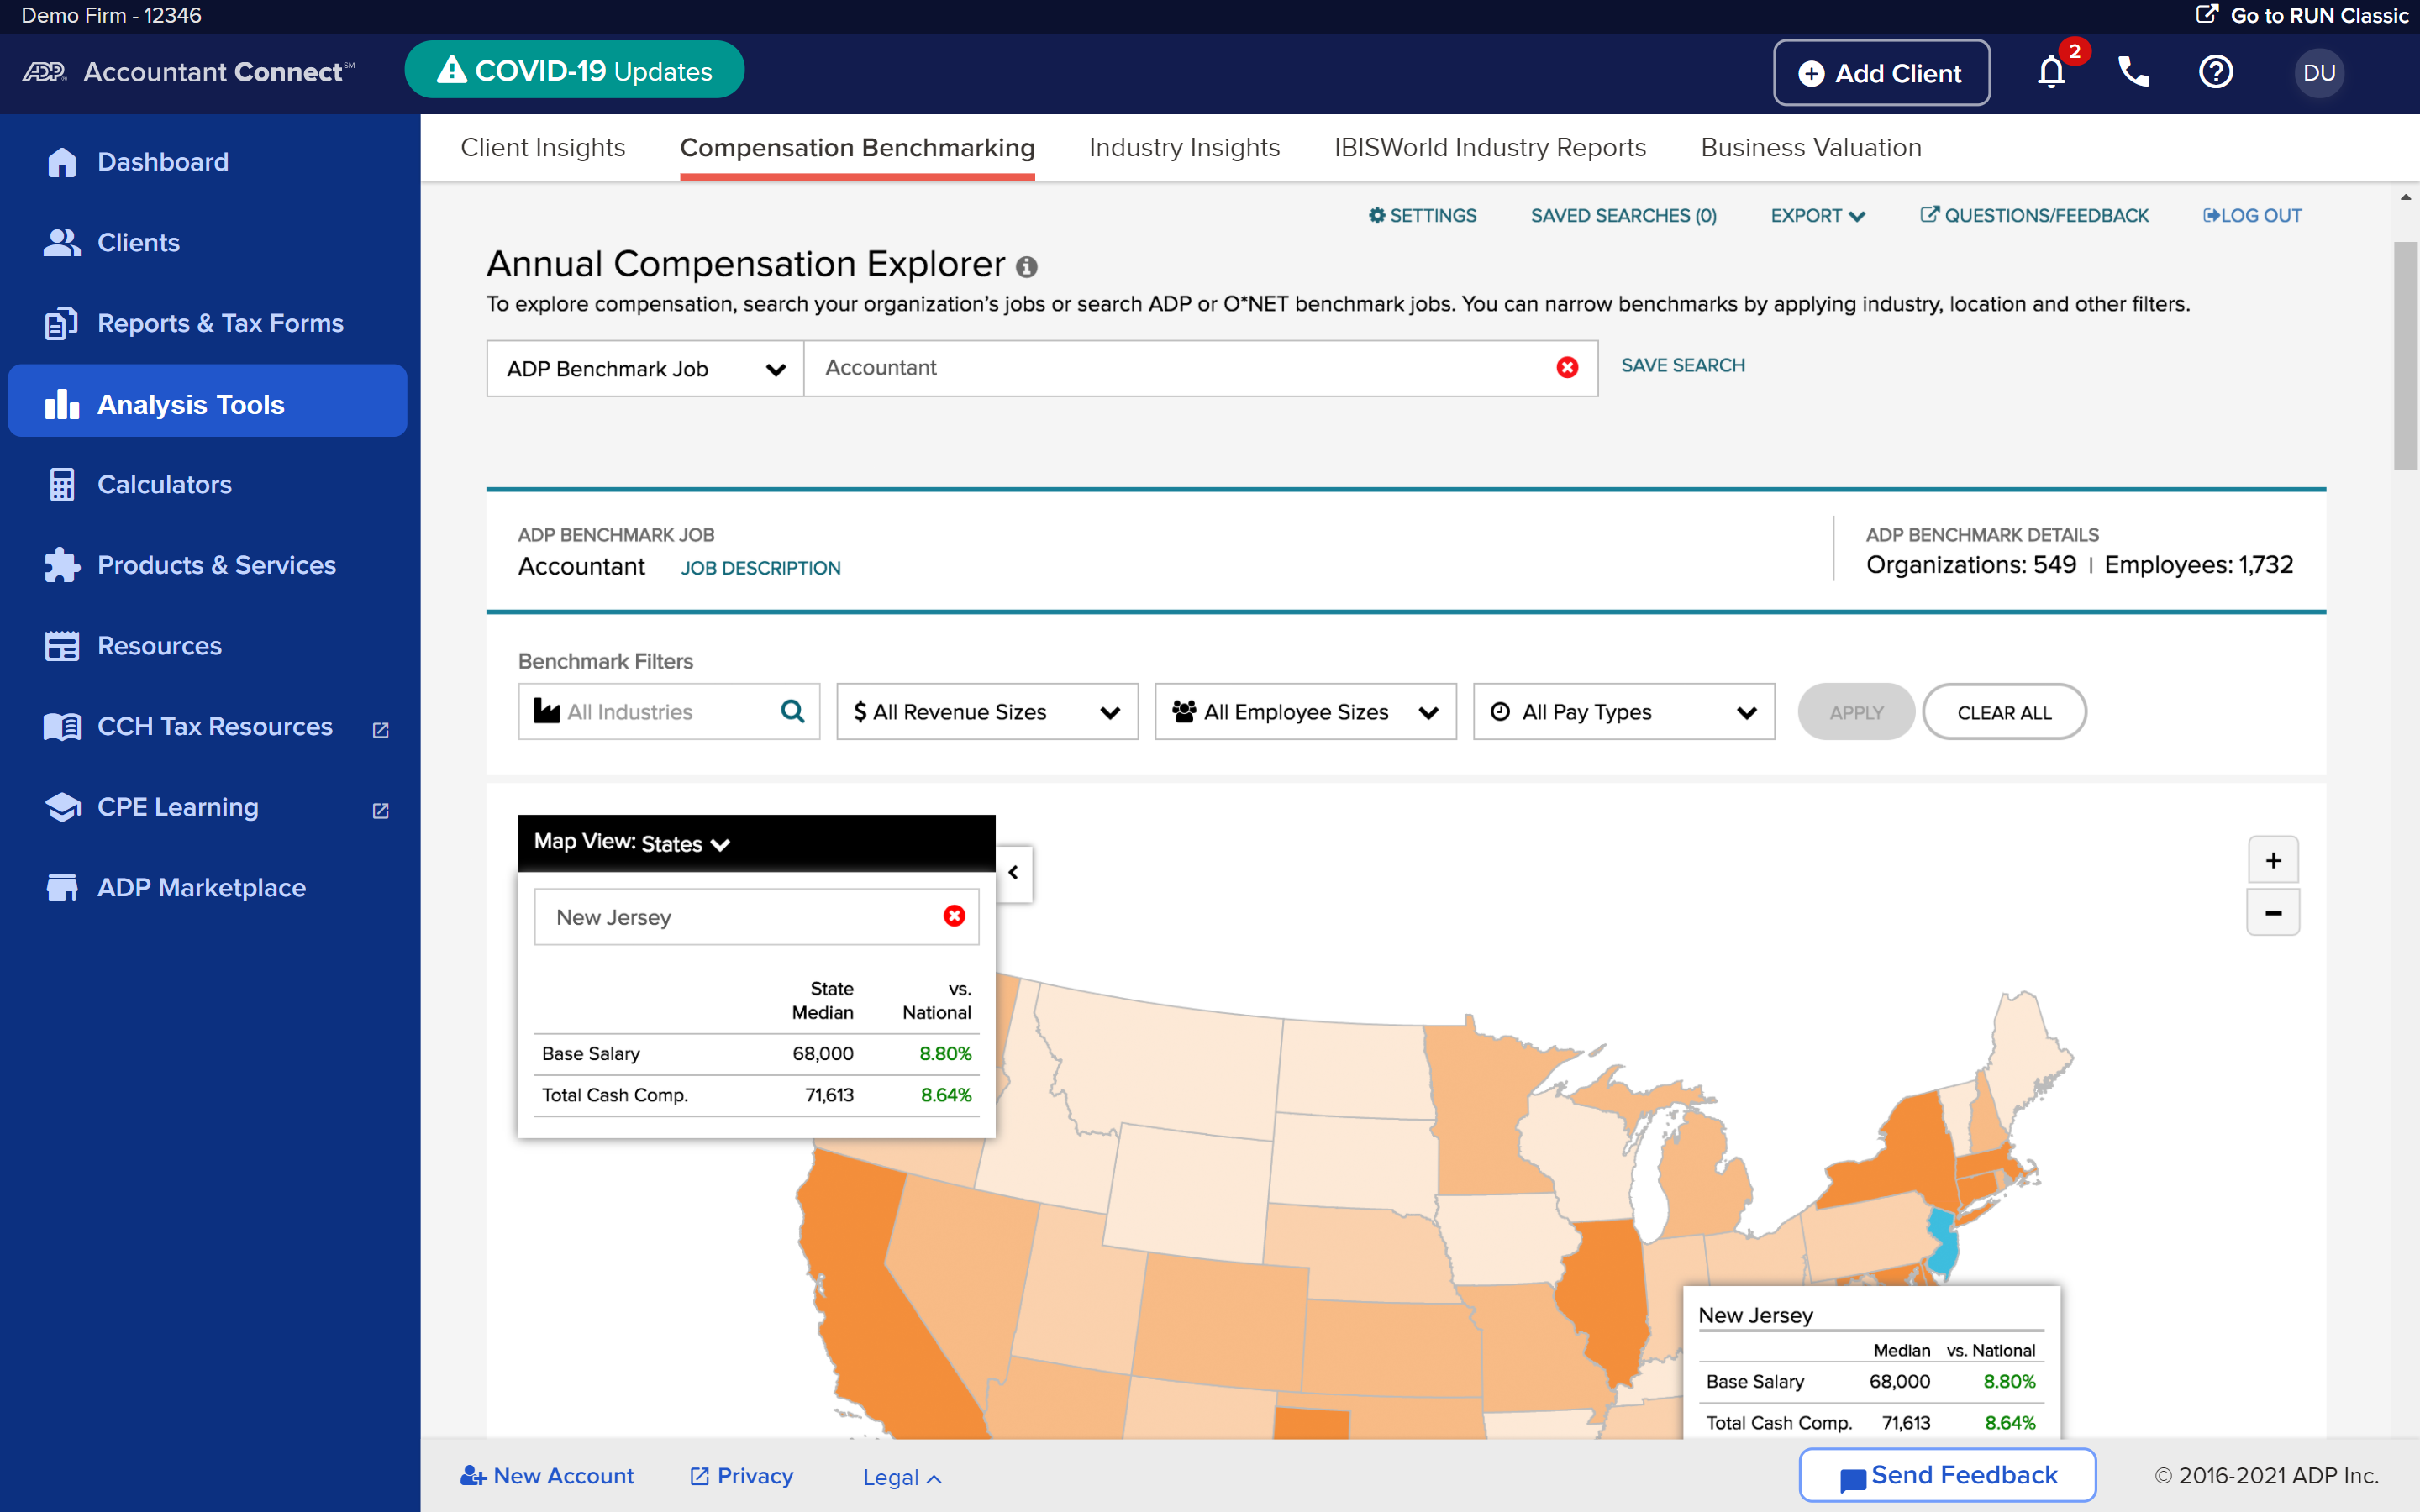 Accountant Connect Comprehensive Benchmarking screen